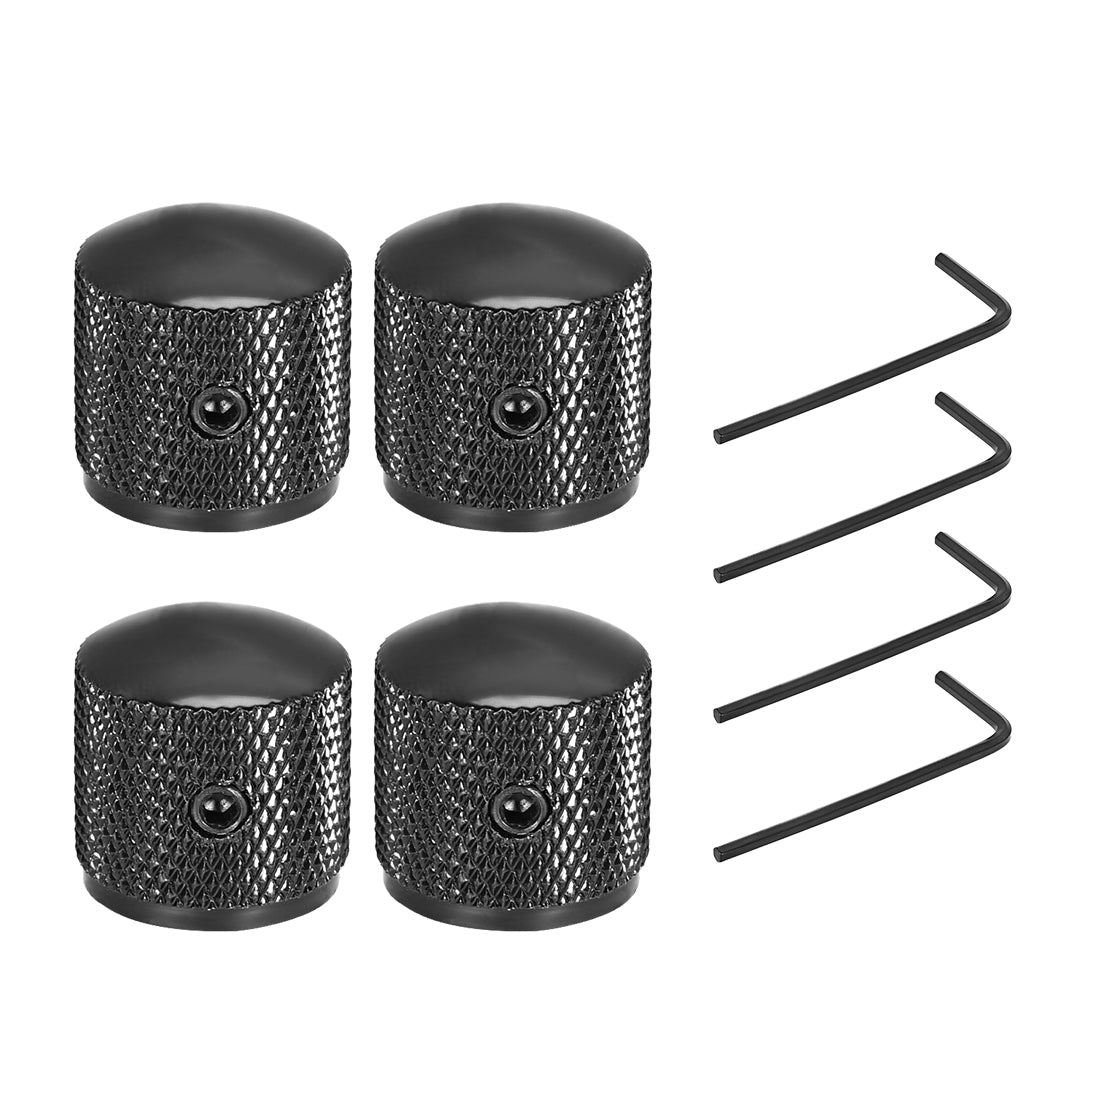 uxcell Uxcell 4pcs,, 6mm Metal Potentiometer Control Knobs for Electric Guitar Bass Volume Tone Knobs Black